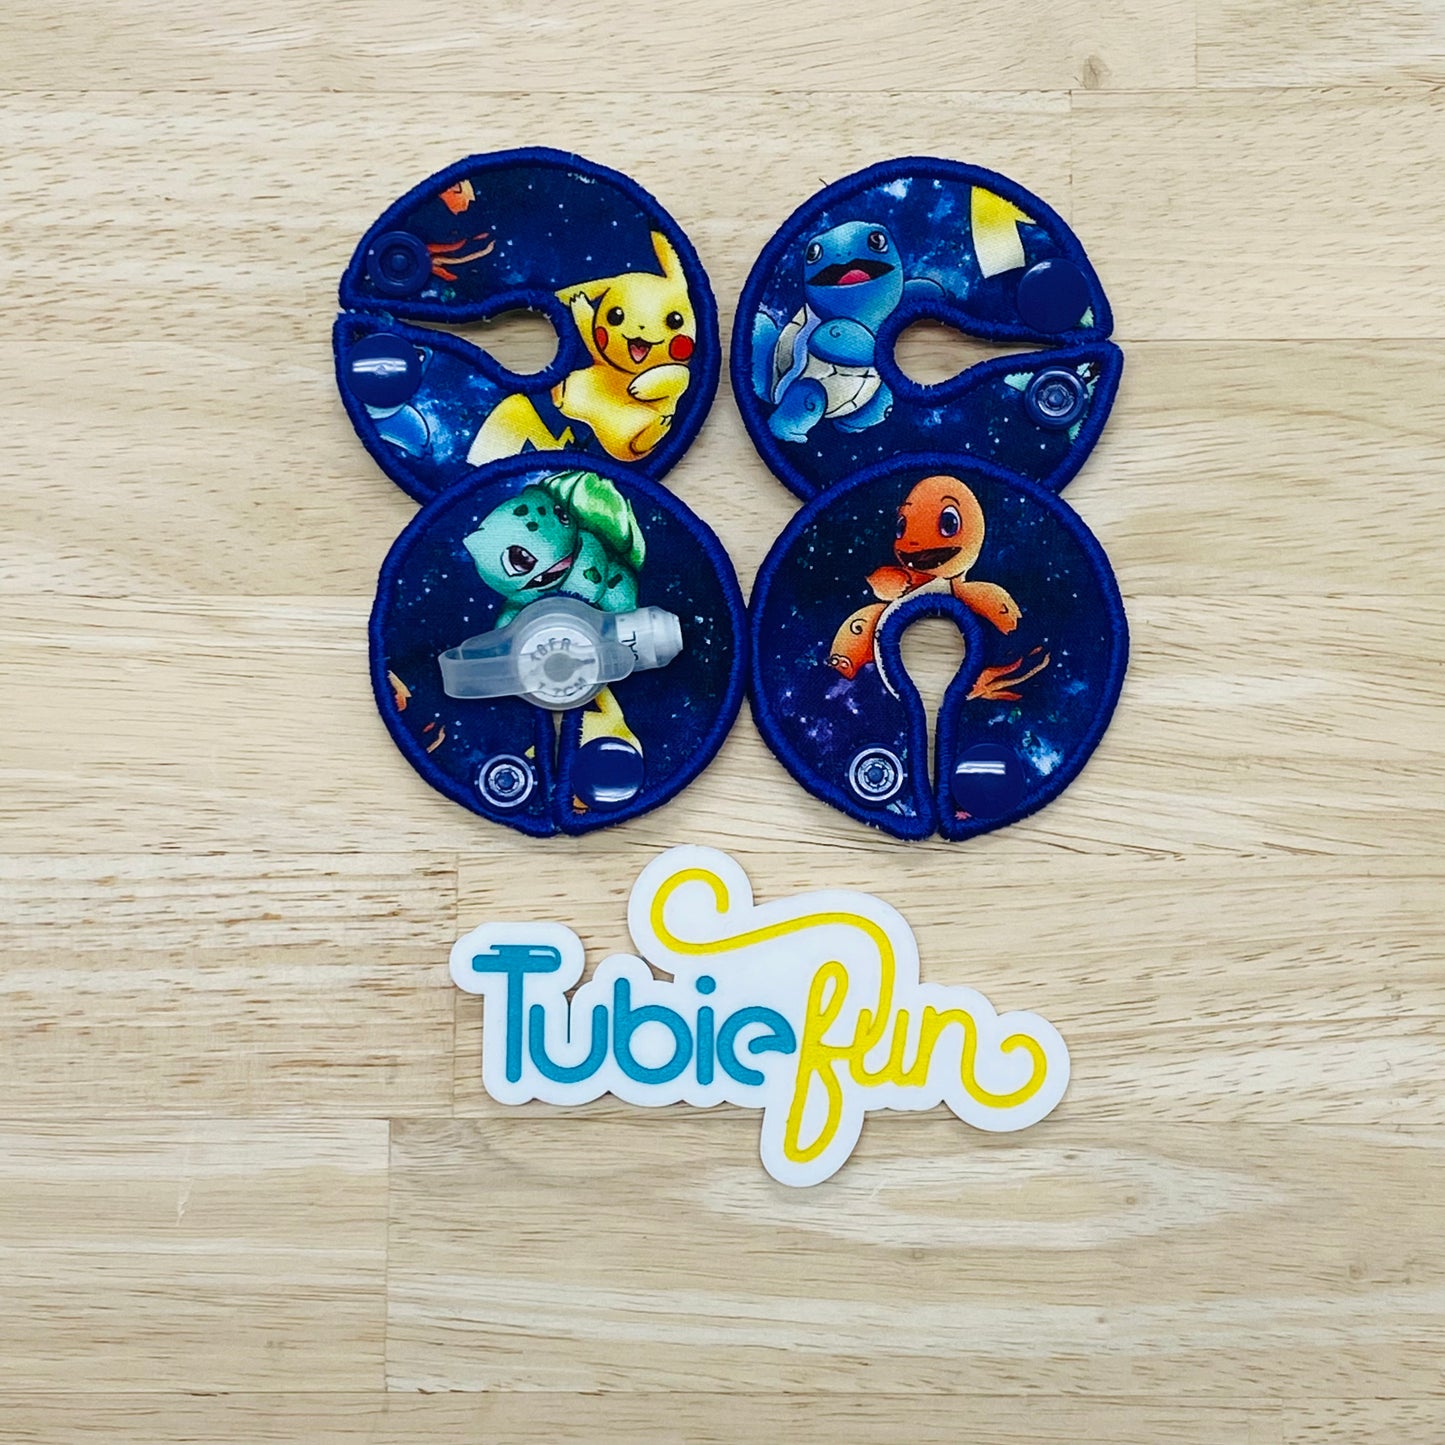 G-Tube Button Pad Cover - Pocket Monsters on Indigo